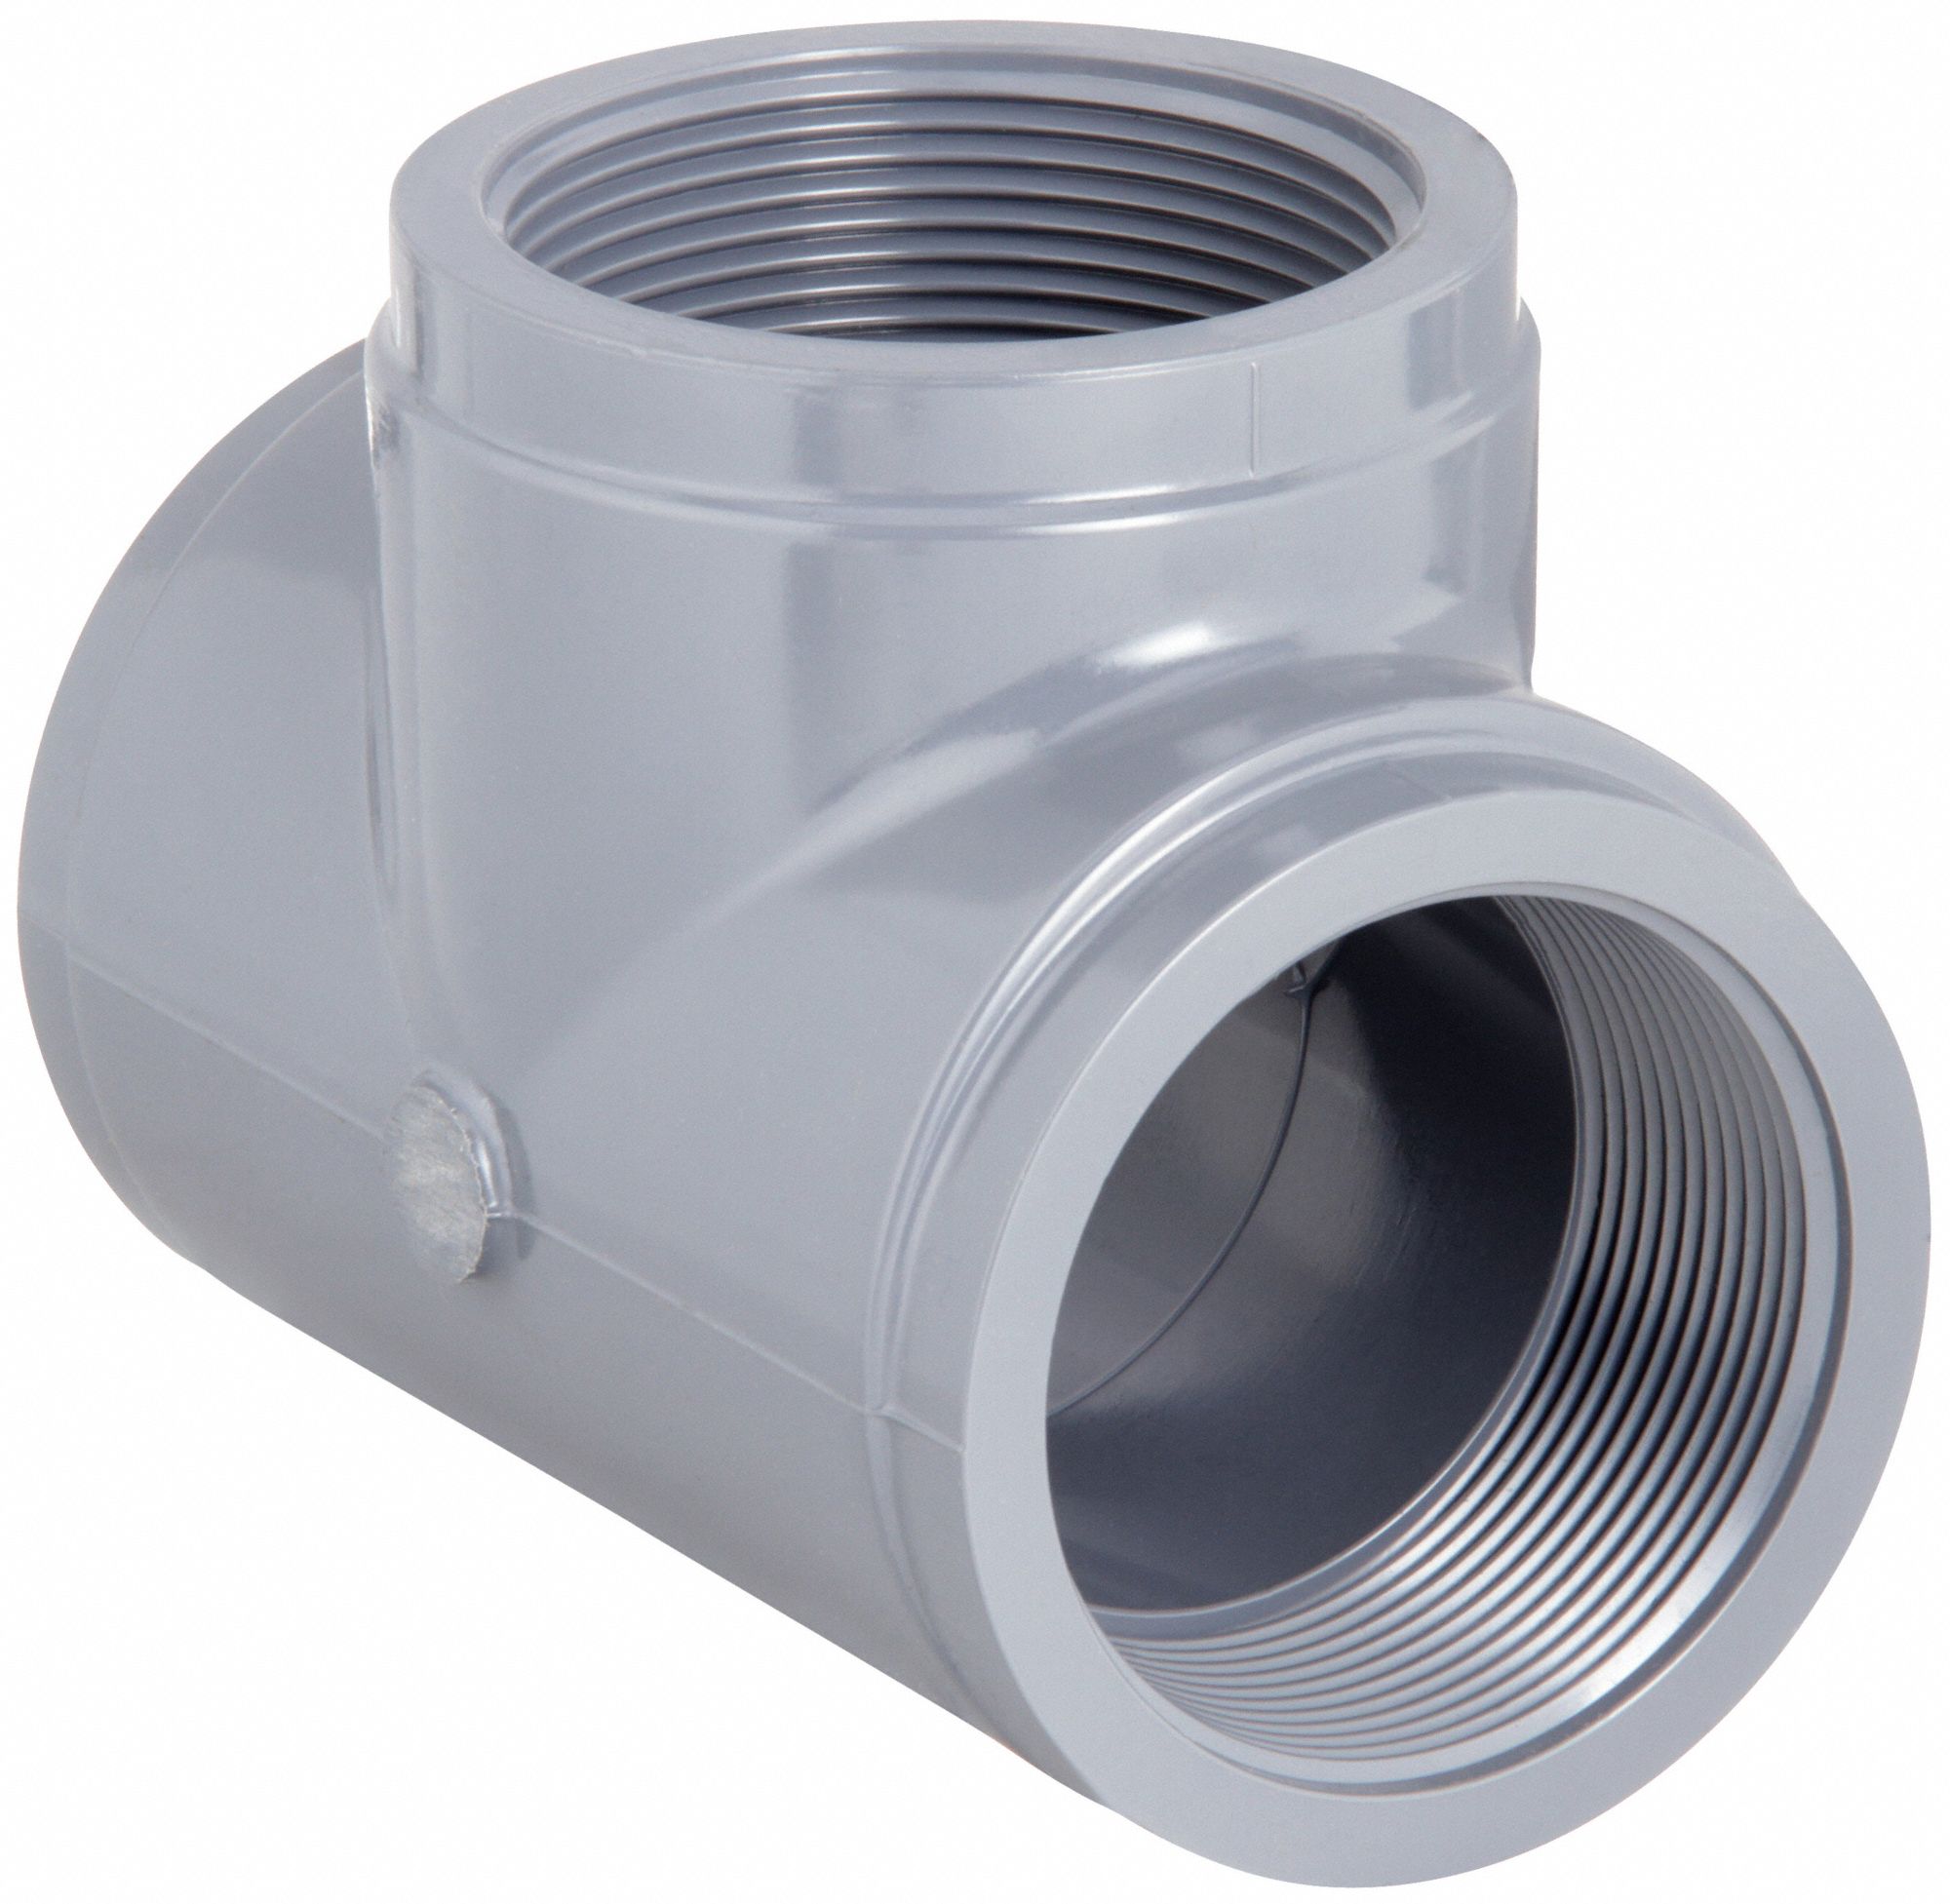 2 in x 2 in x 2 in Fitting Pipe Size, Schedule 80, Tee - 6NF98|805-020 ...